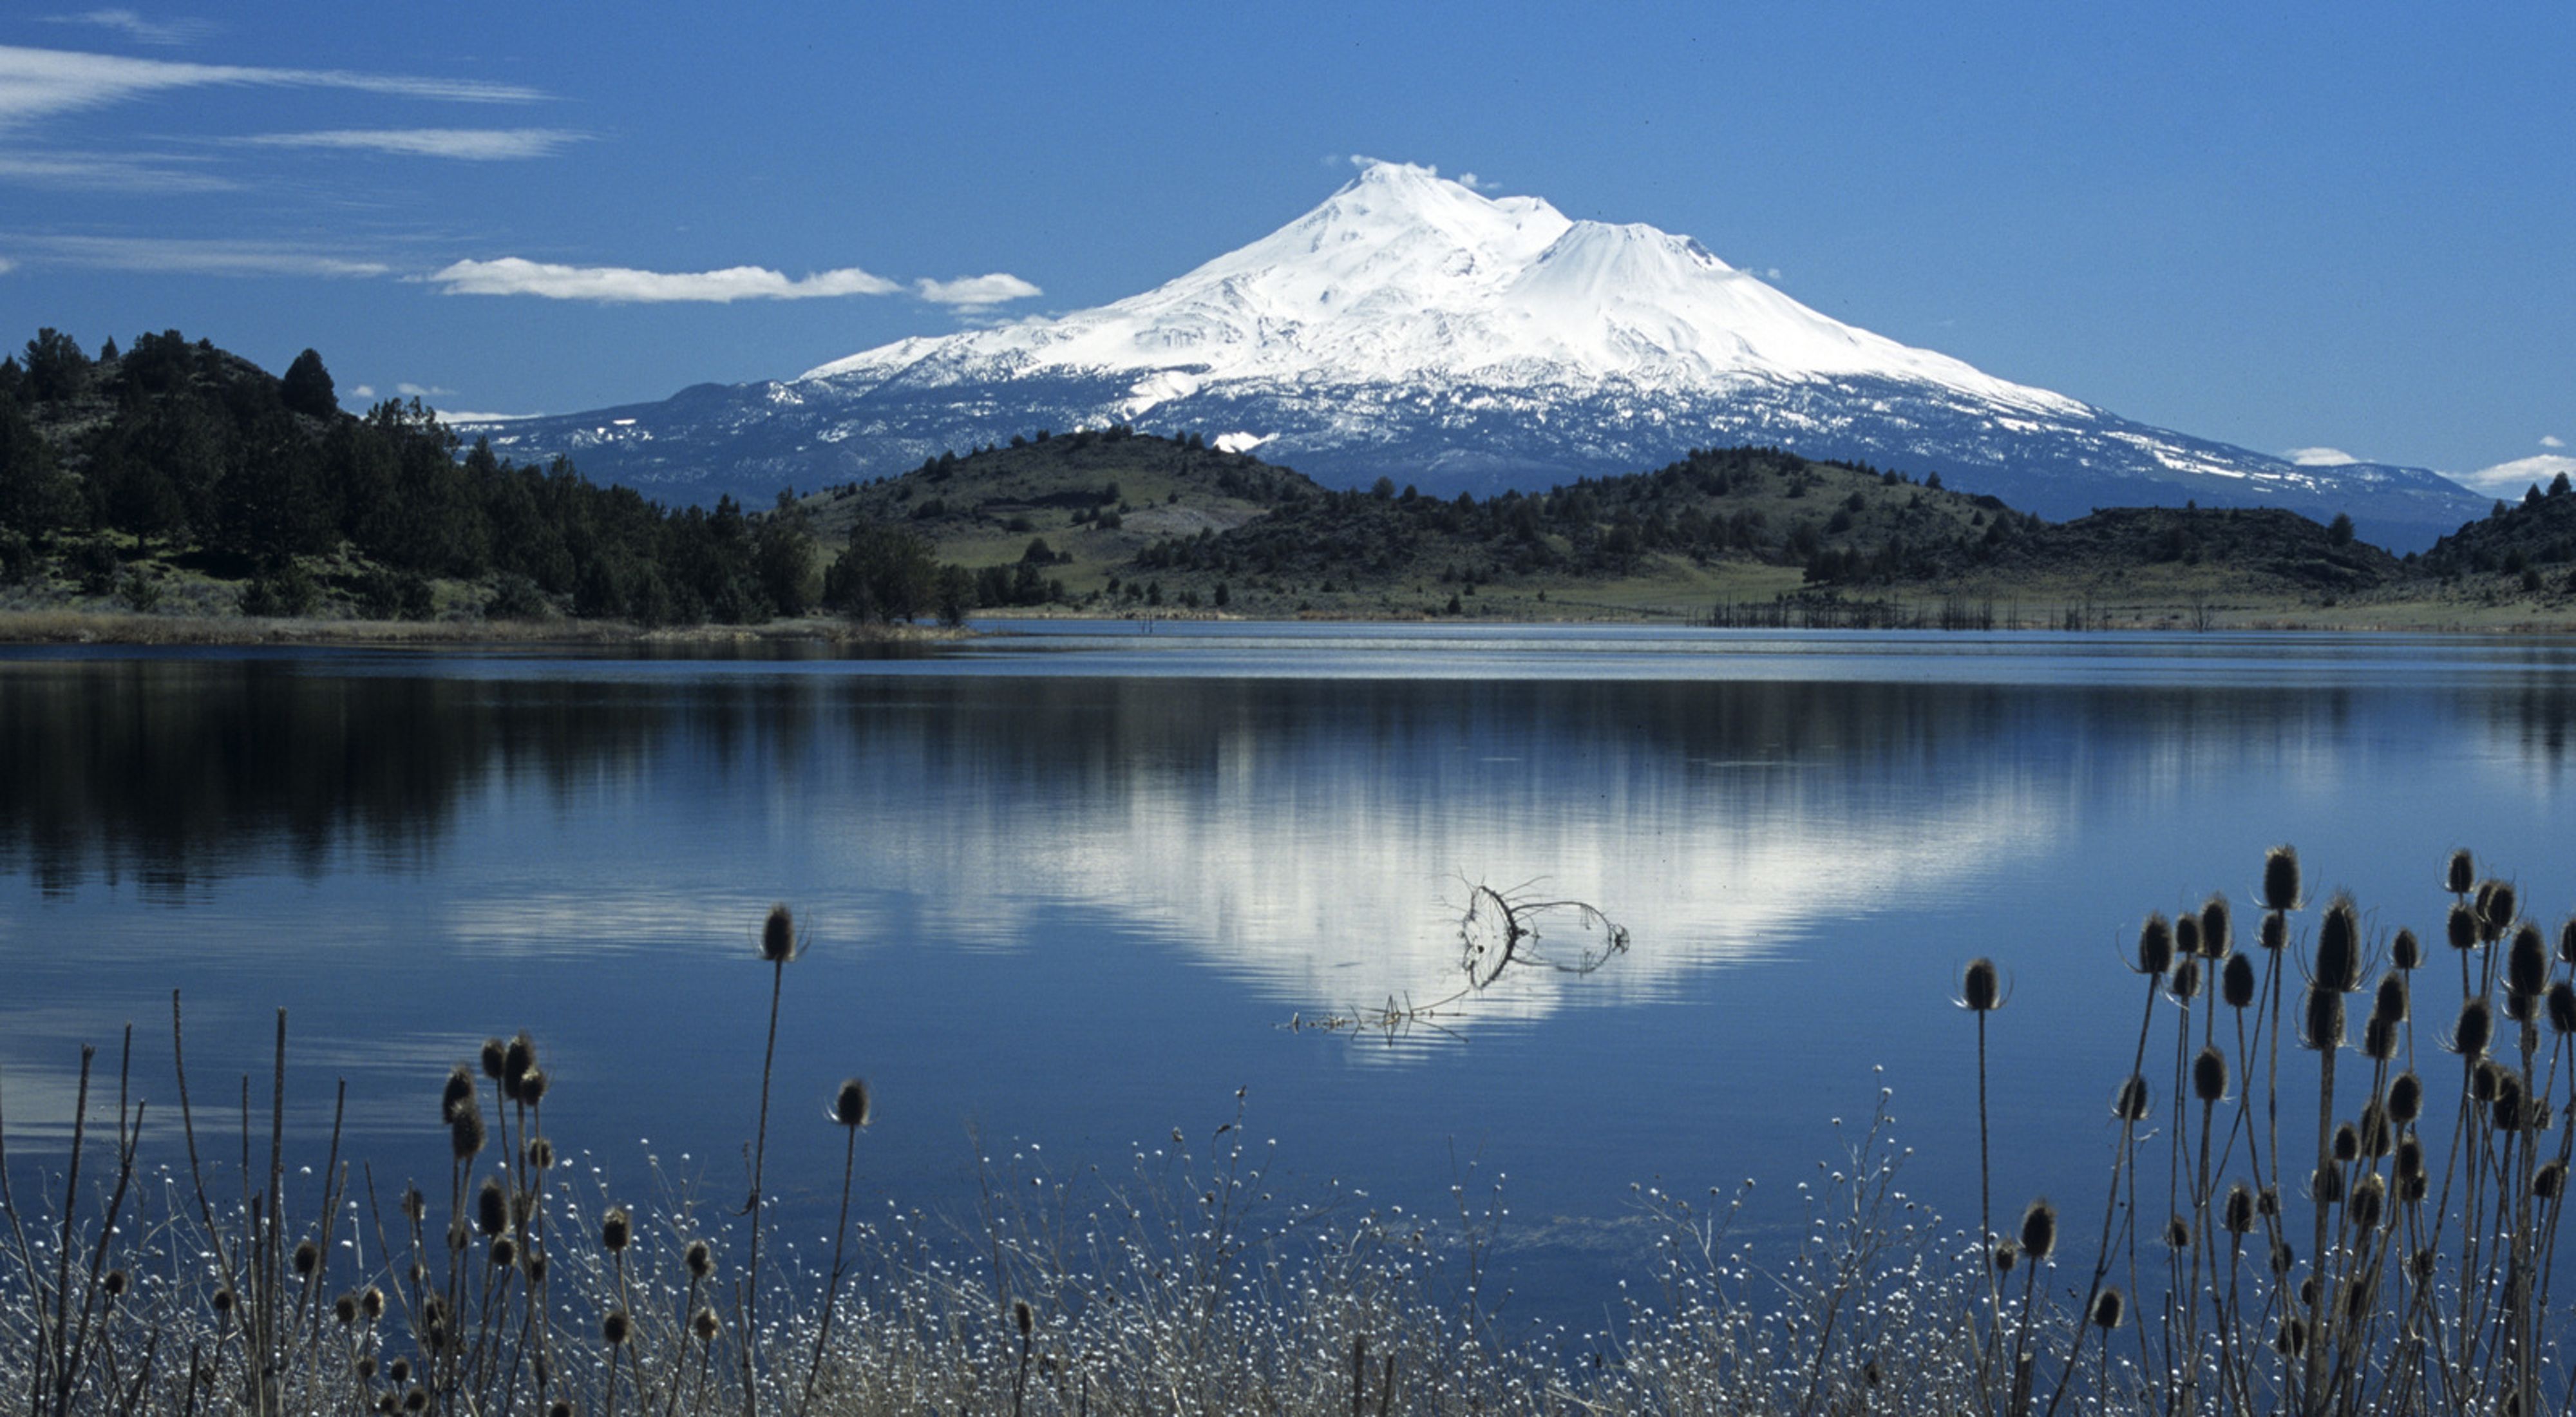 Snowcapped volcanic peak in the distance, reflected in the waters of a lake in the foreground.